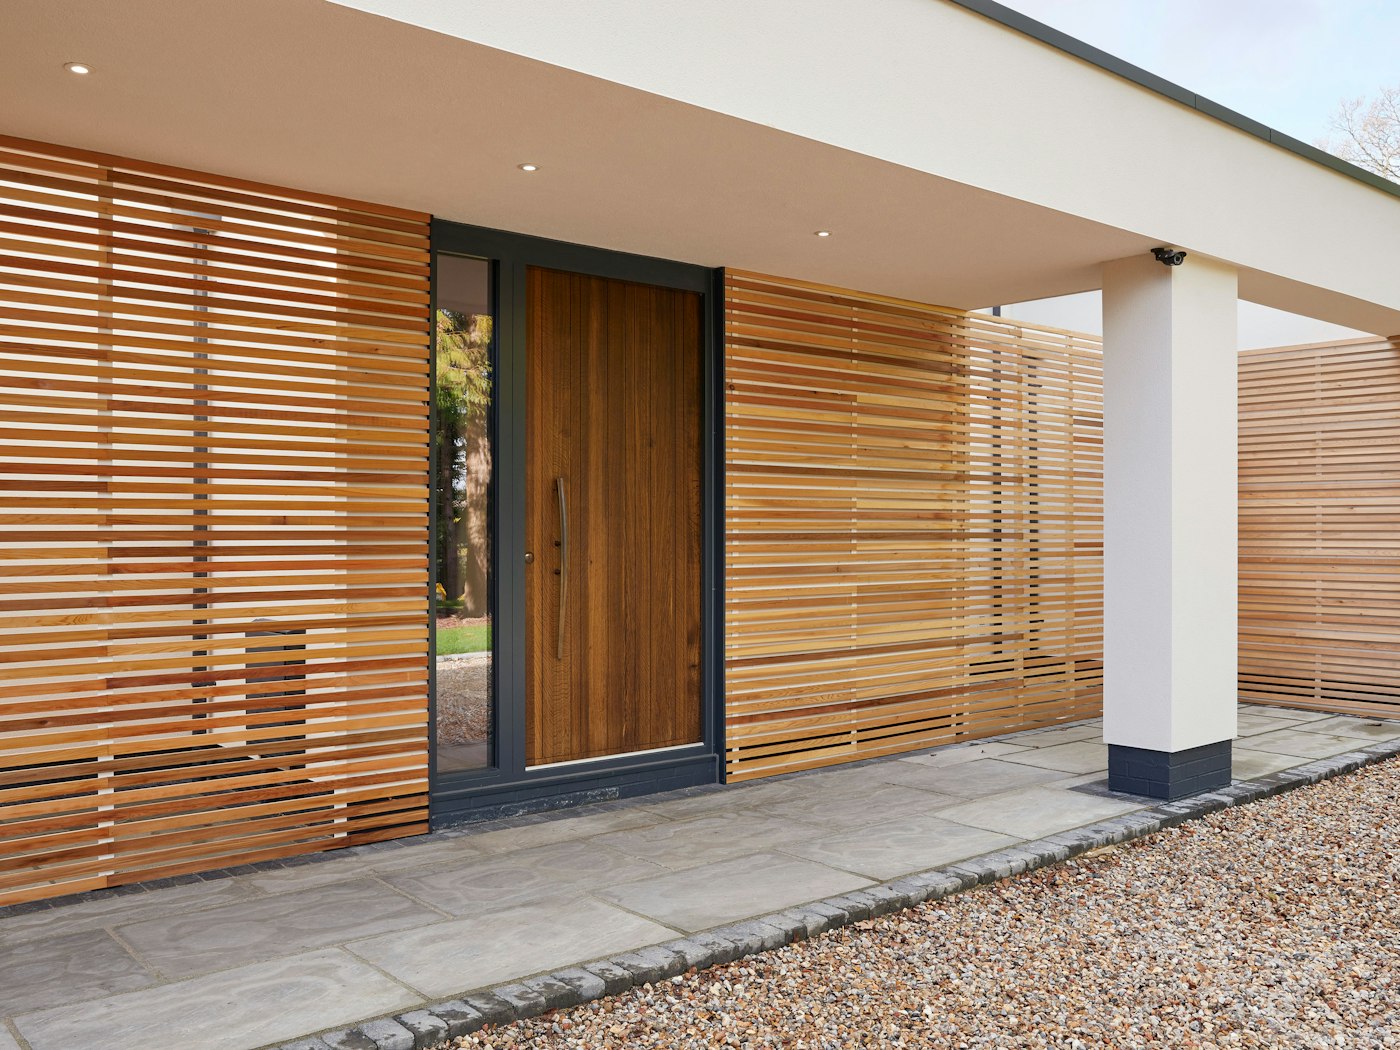 In fumed oak, this Rondo V is offset by off-white render and light oak cladding